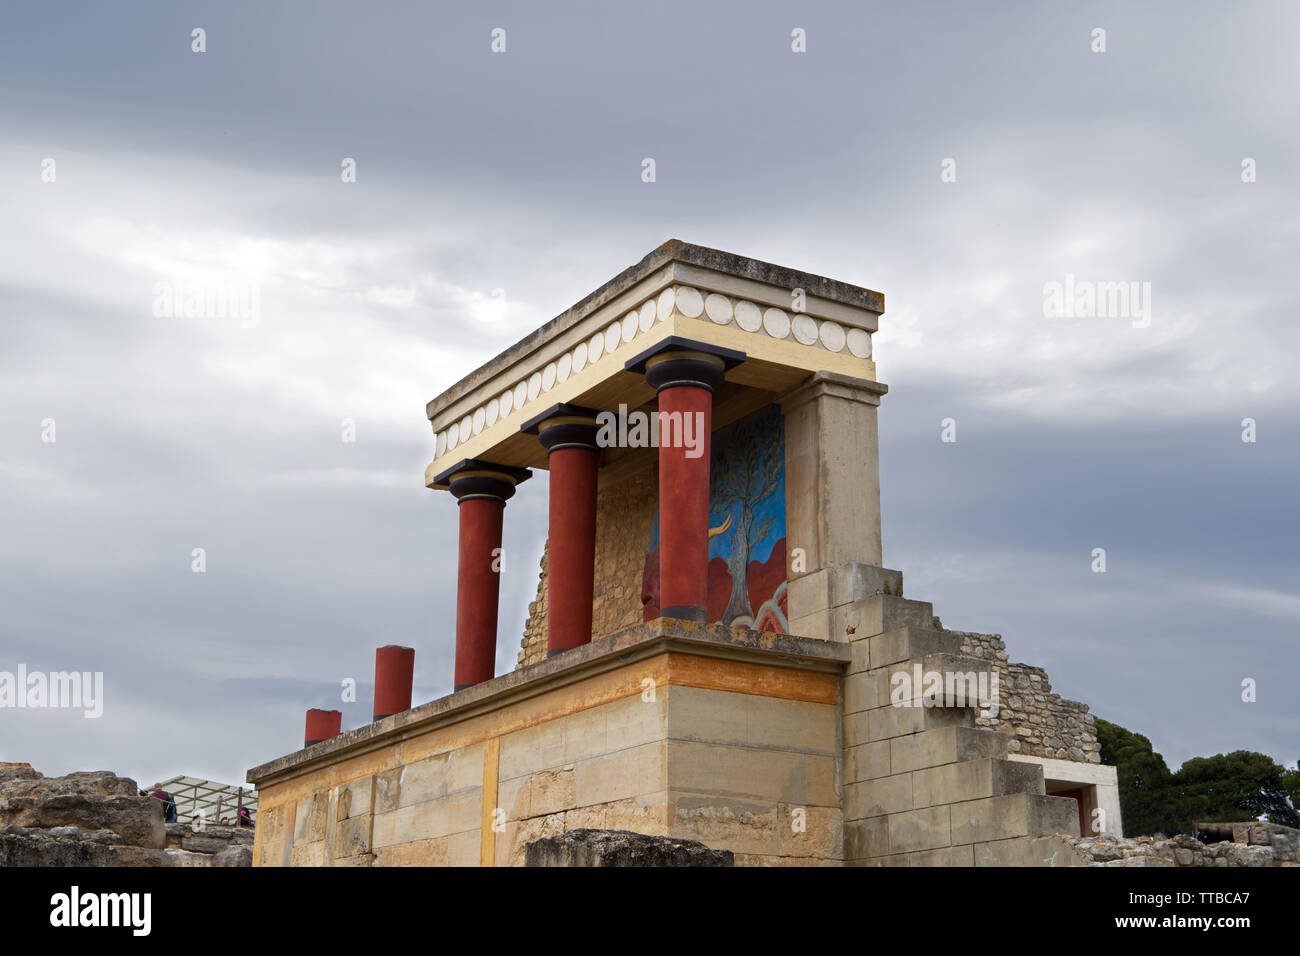 Palace of Knossos was thought to be the capital of Minoan Crete. It is thought to be the cradle of western civilisation, dating back to about 2000 BC. Stock Photo